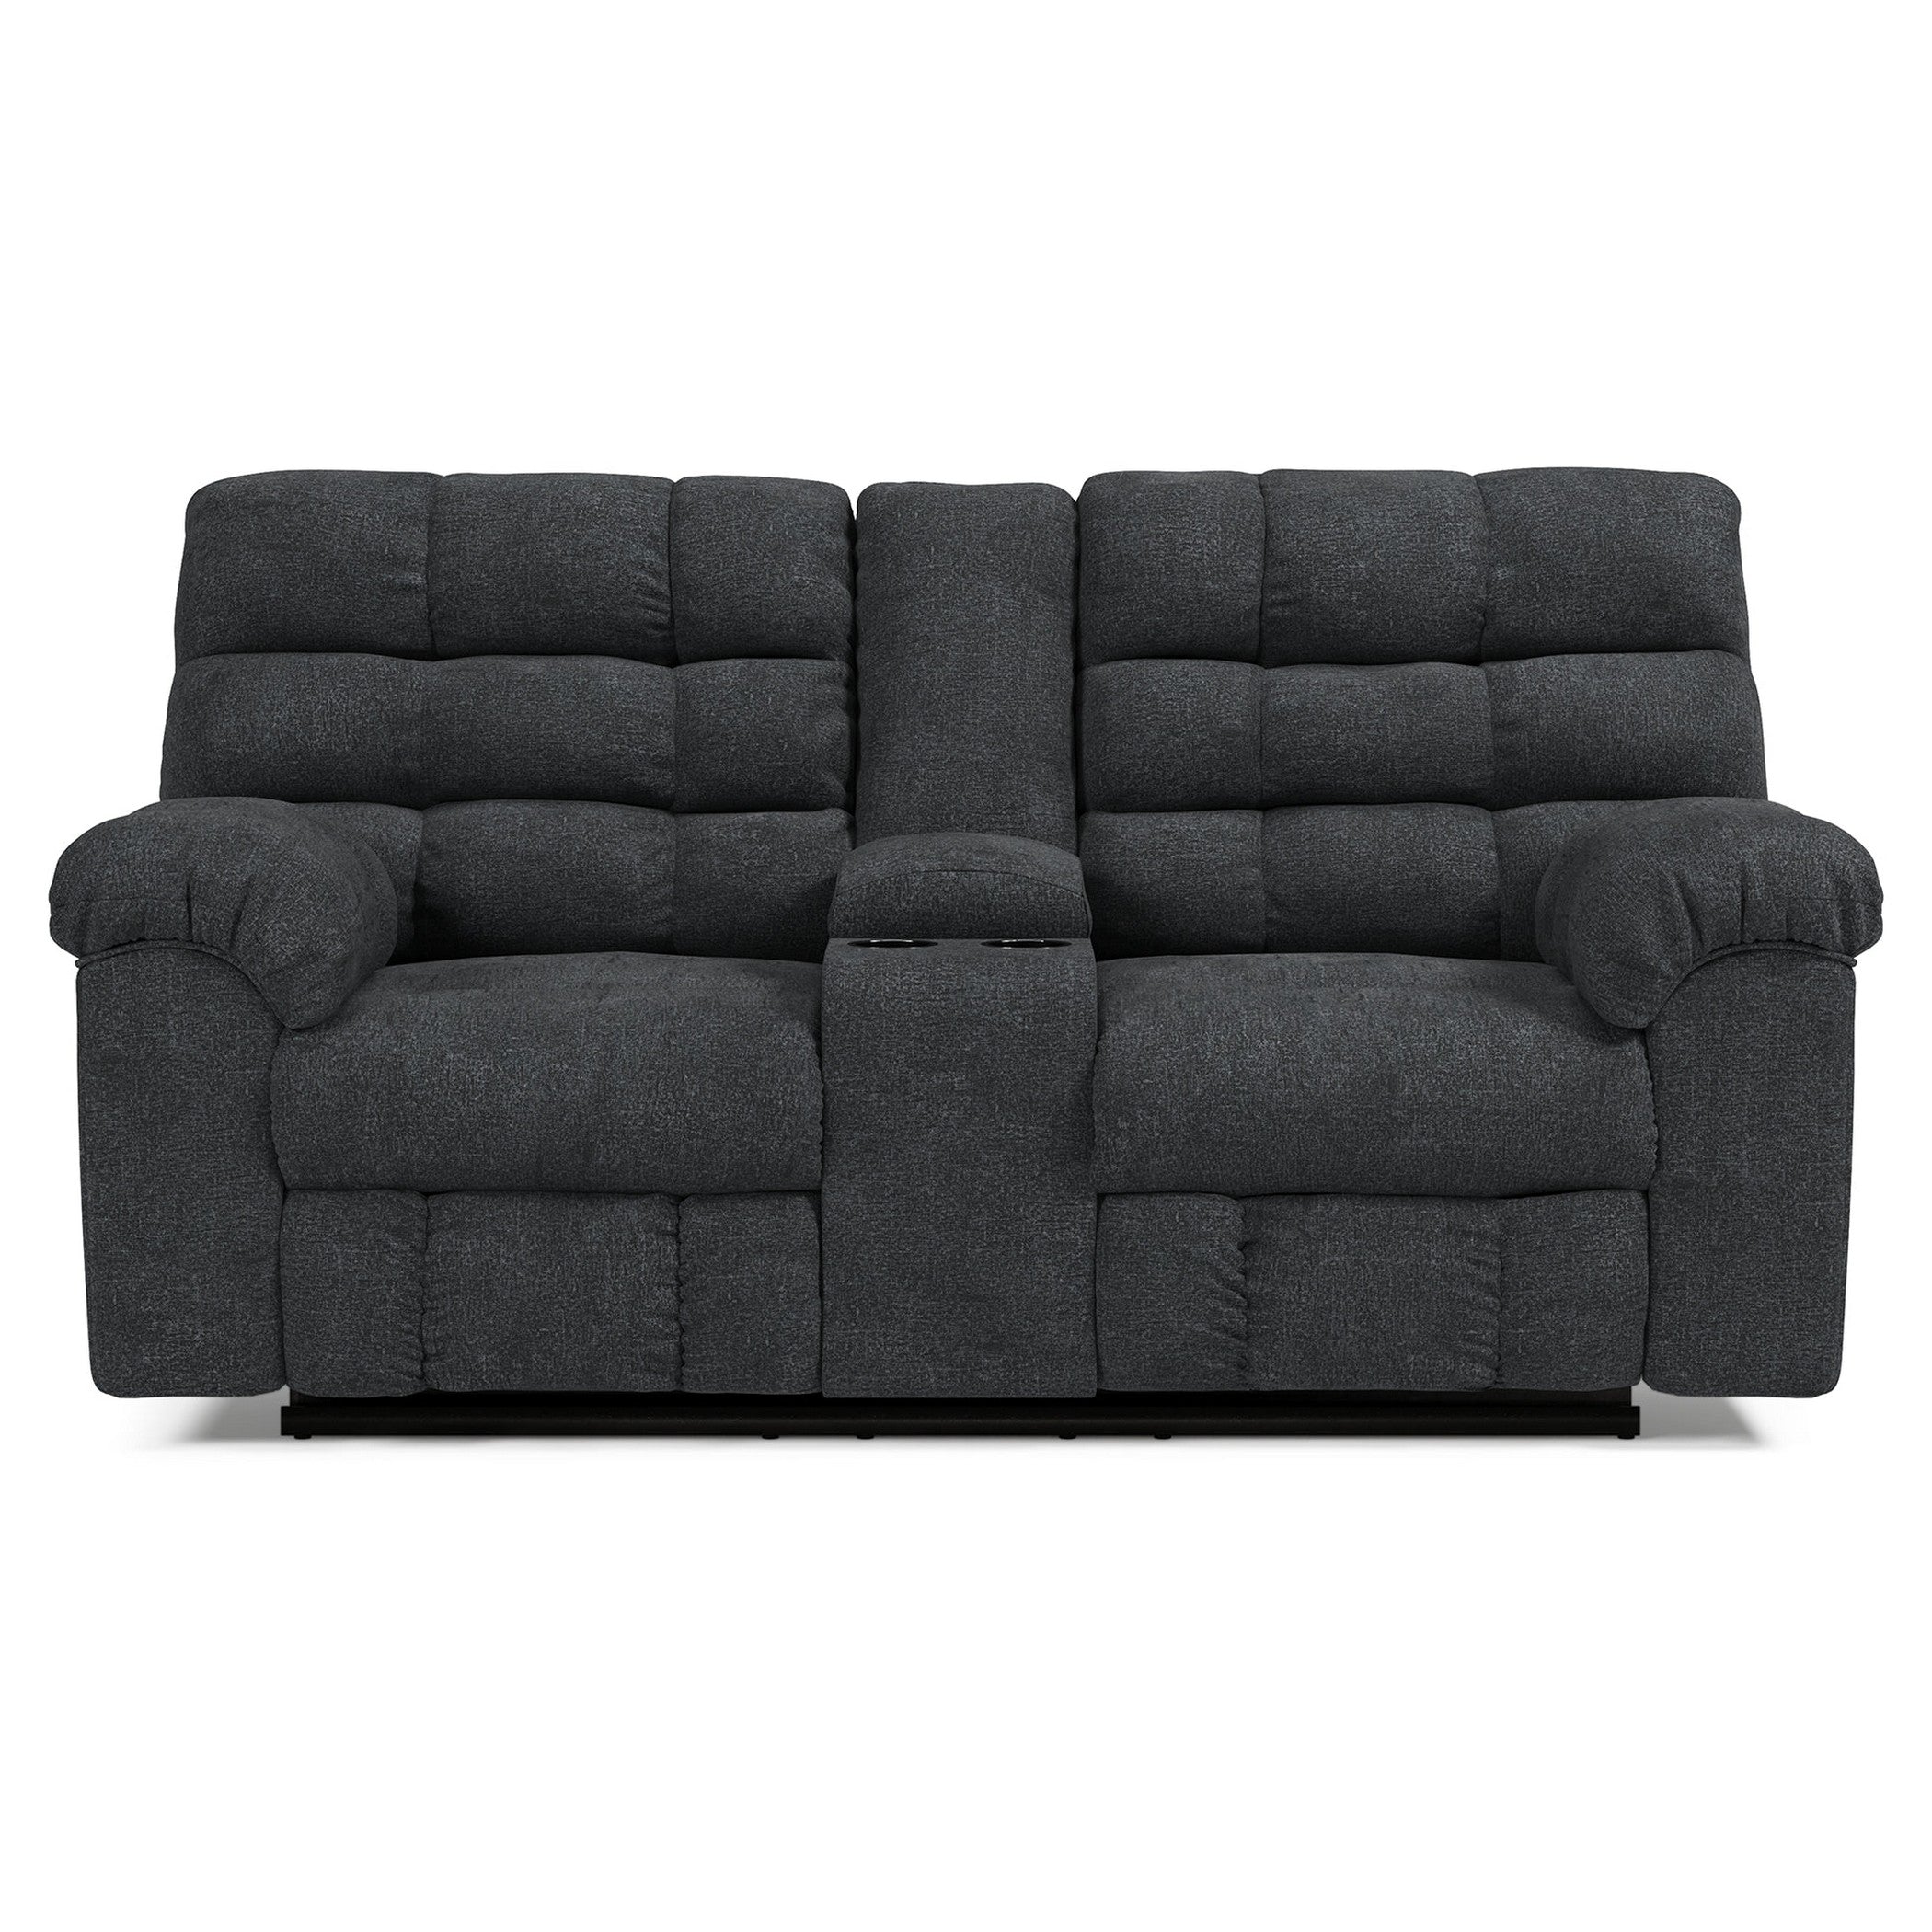 Wilhurst Reclining Loveseat with Console Ash-5540394